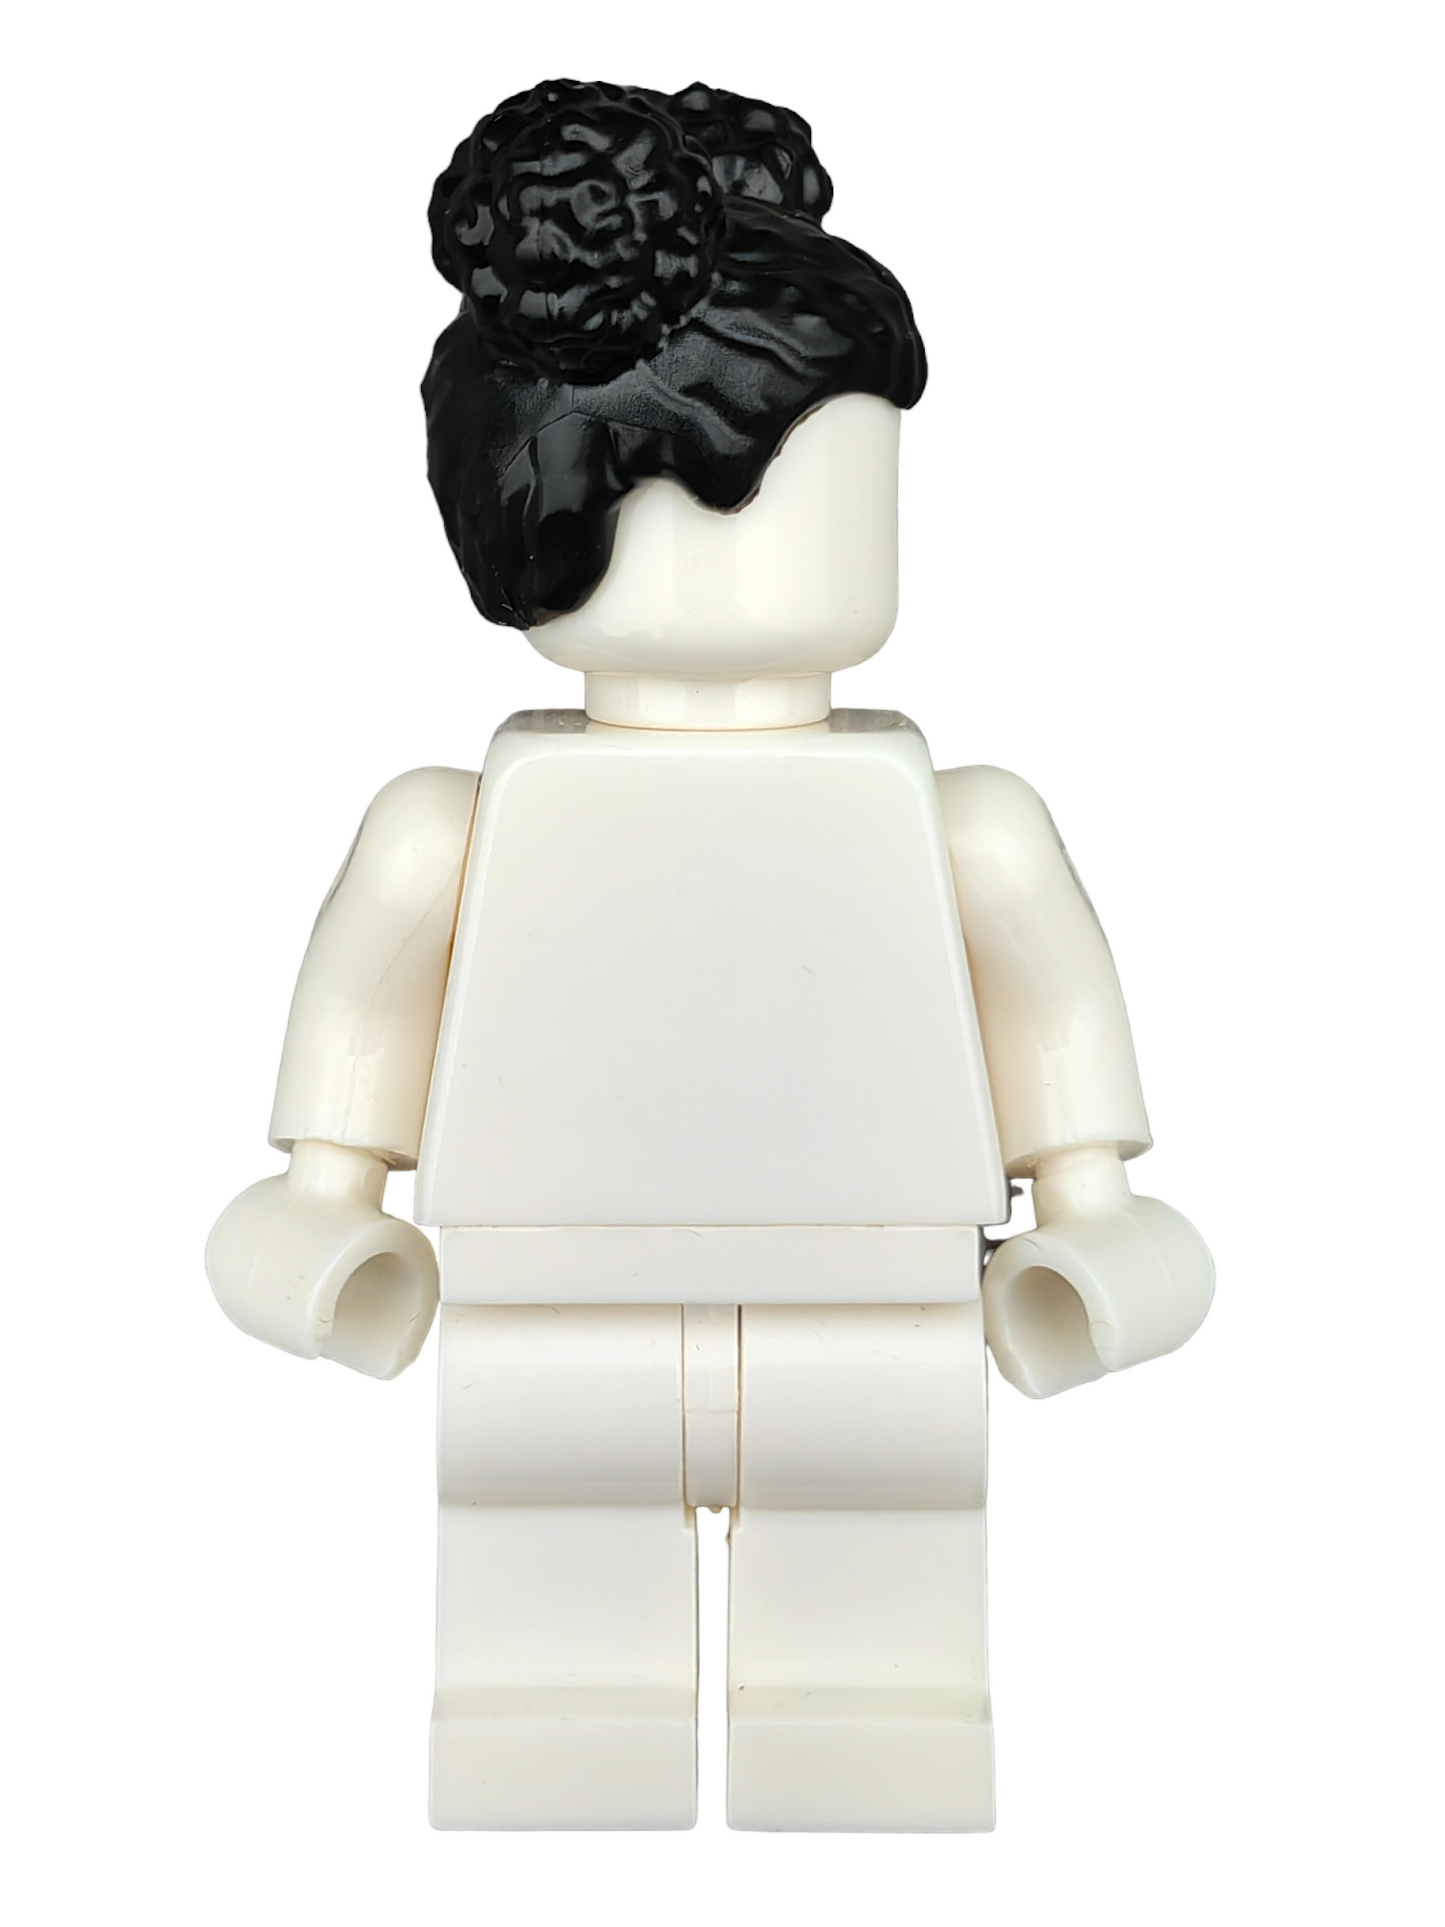 LEGO Wig, Black Hair with a Center Parting and Two Buns on Top - UB1278